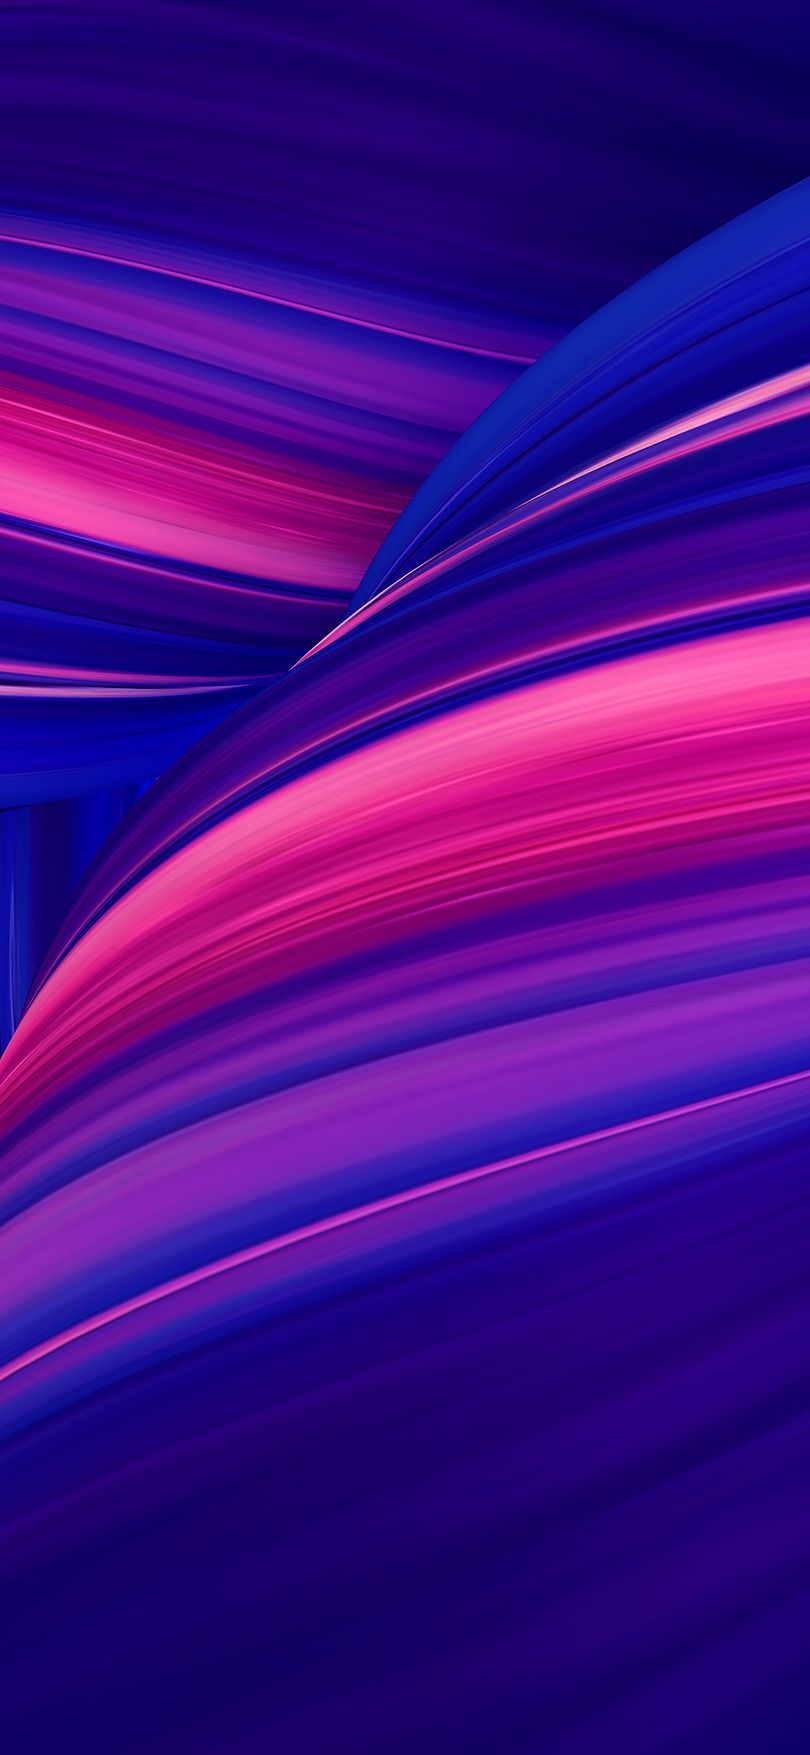 Free download Download Oppo F9 Pro Stock Wallpaper Full HD